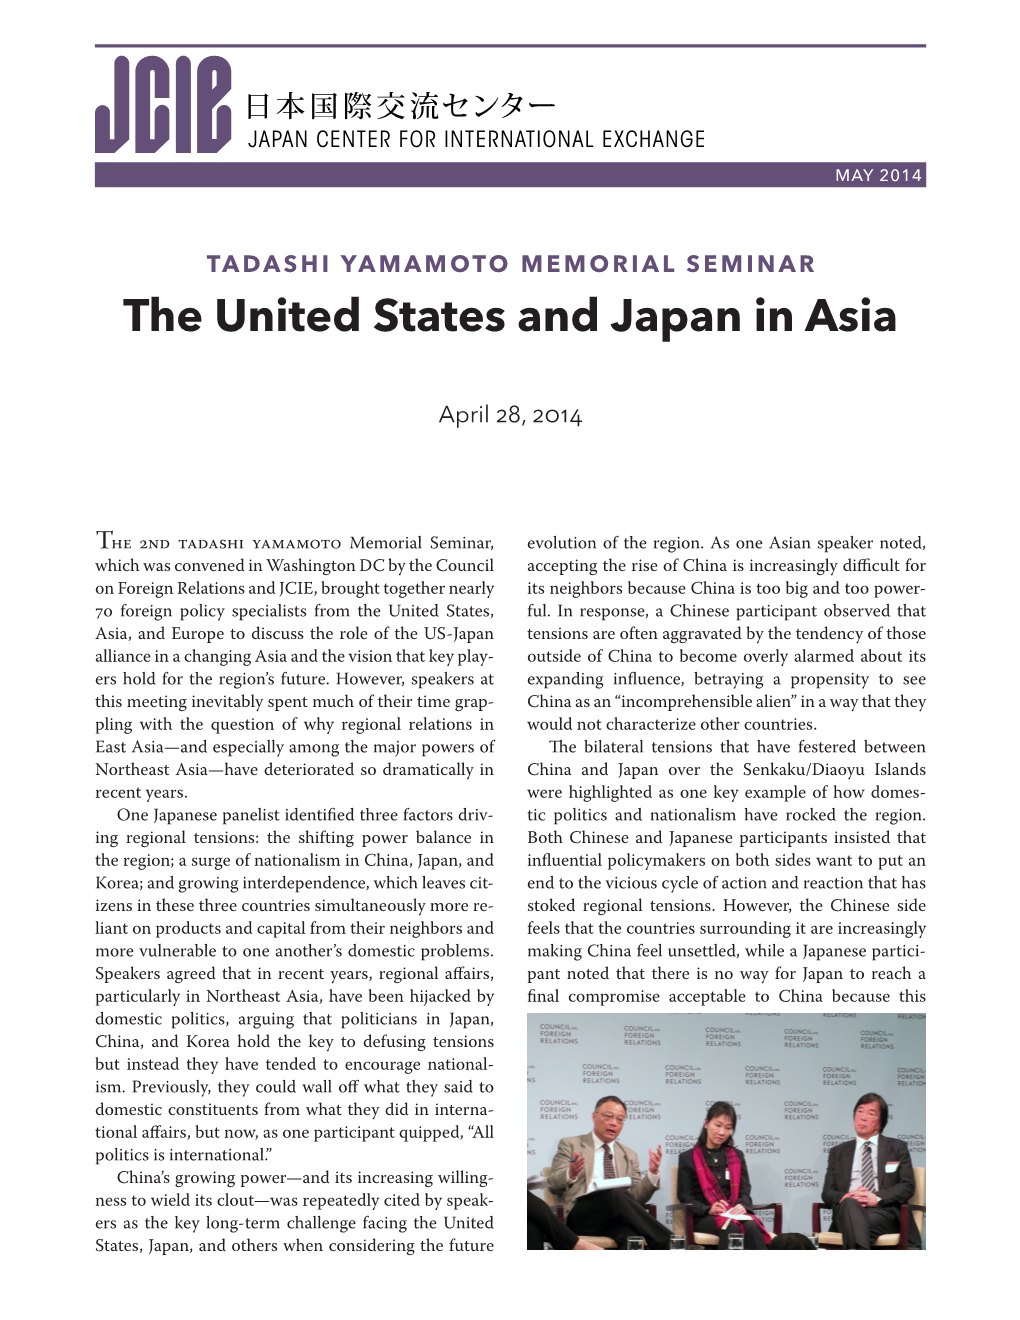 The United States and Japan in Asia